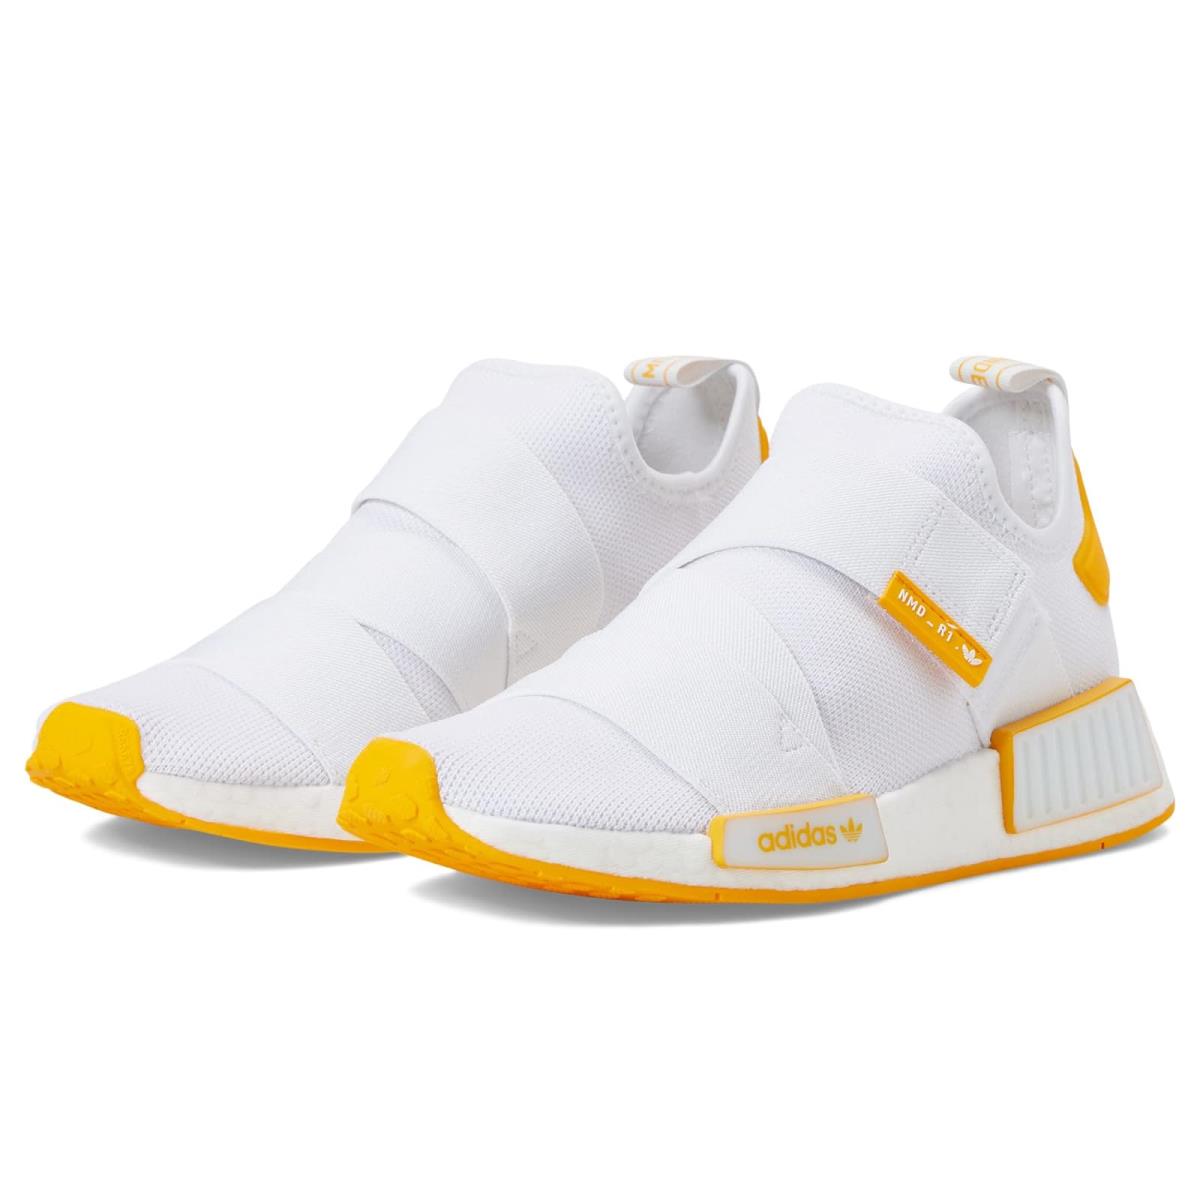 Woman`s Sneakers Athletic Shoes Adidas Originals Nmd-R1 Strap White/Collegiate Gold/Collegiate Gold